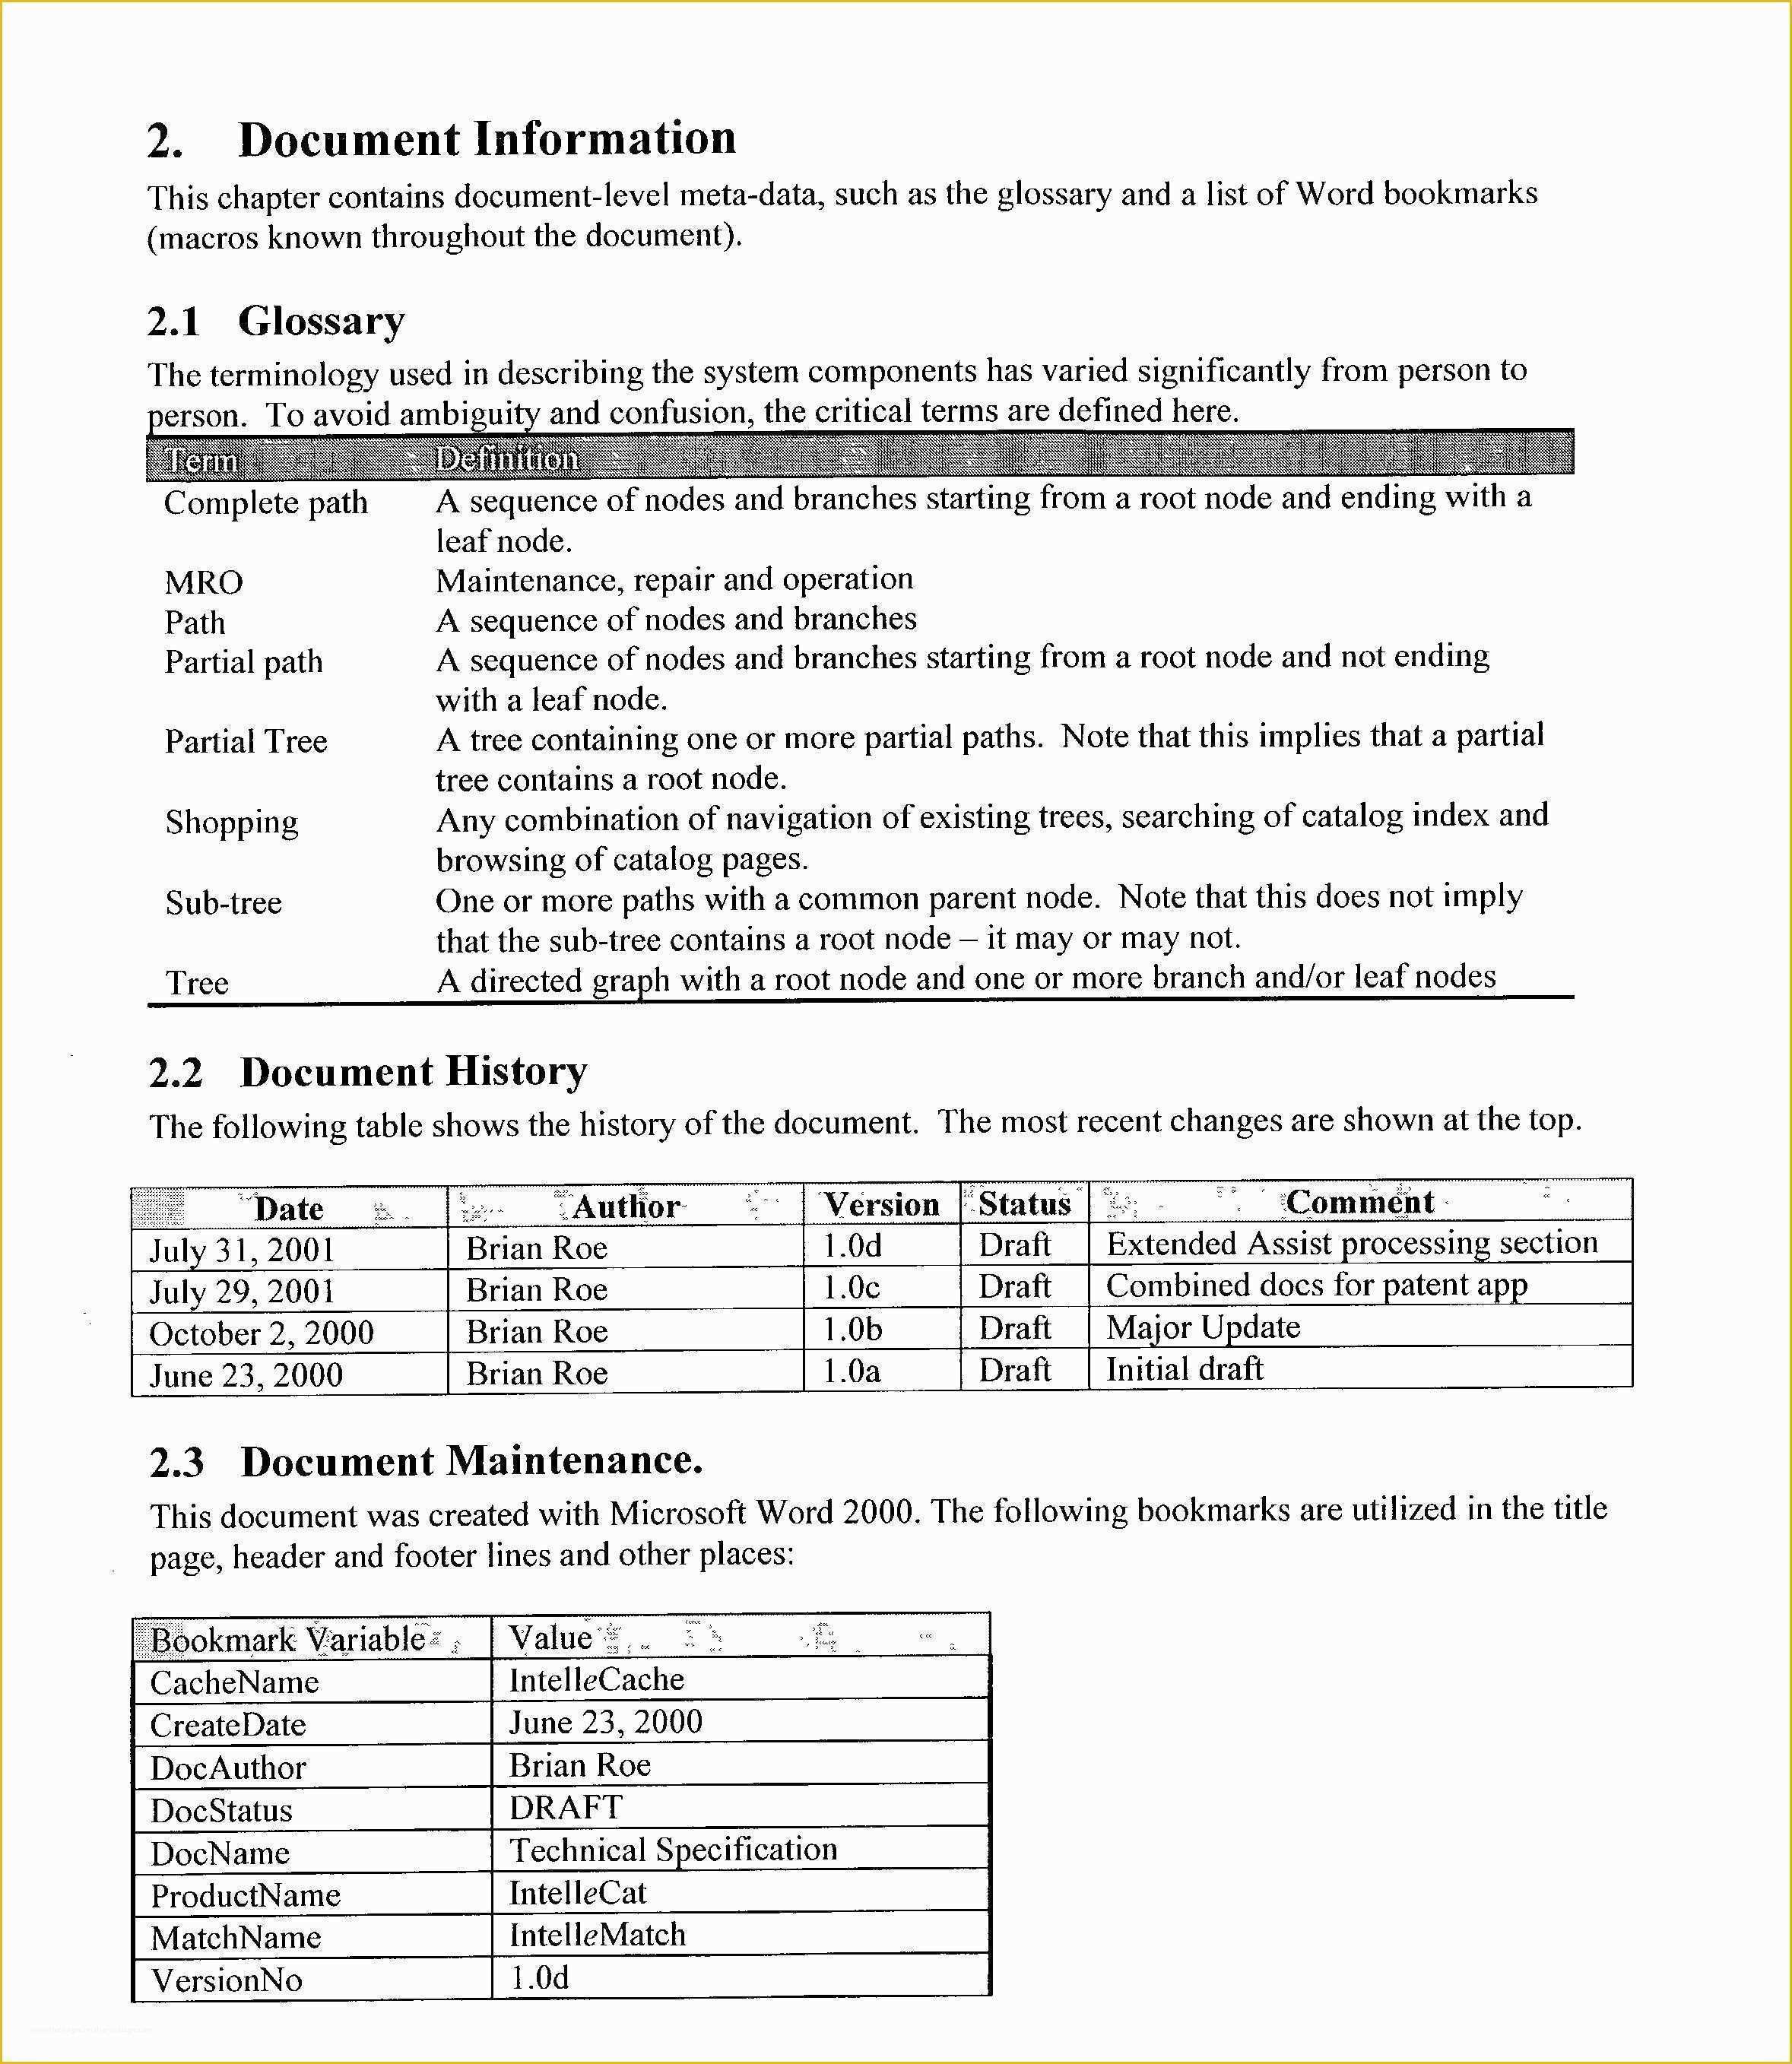 Resume Templates Free Download Word 2007 Of Resume Templates Microsoft Word 2007 Free Download